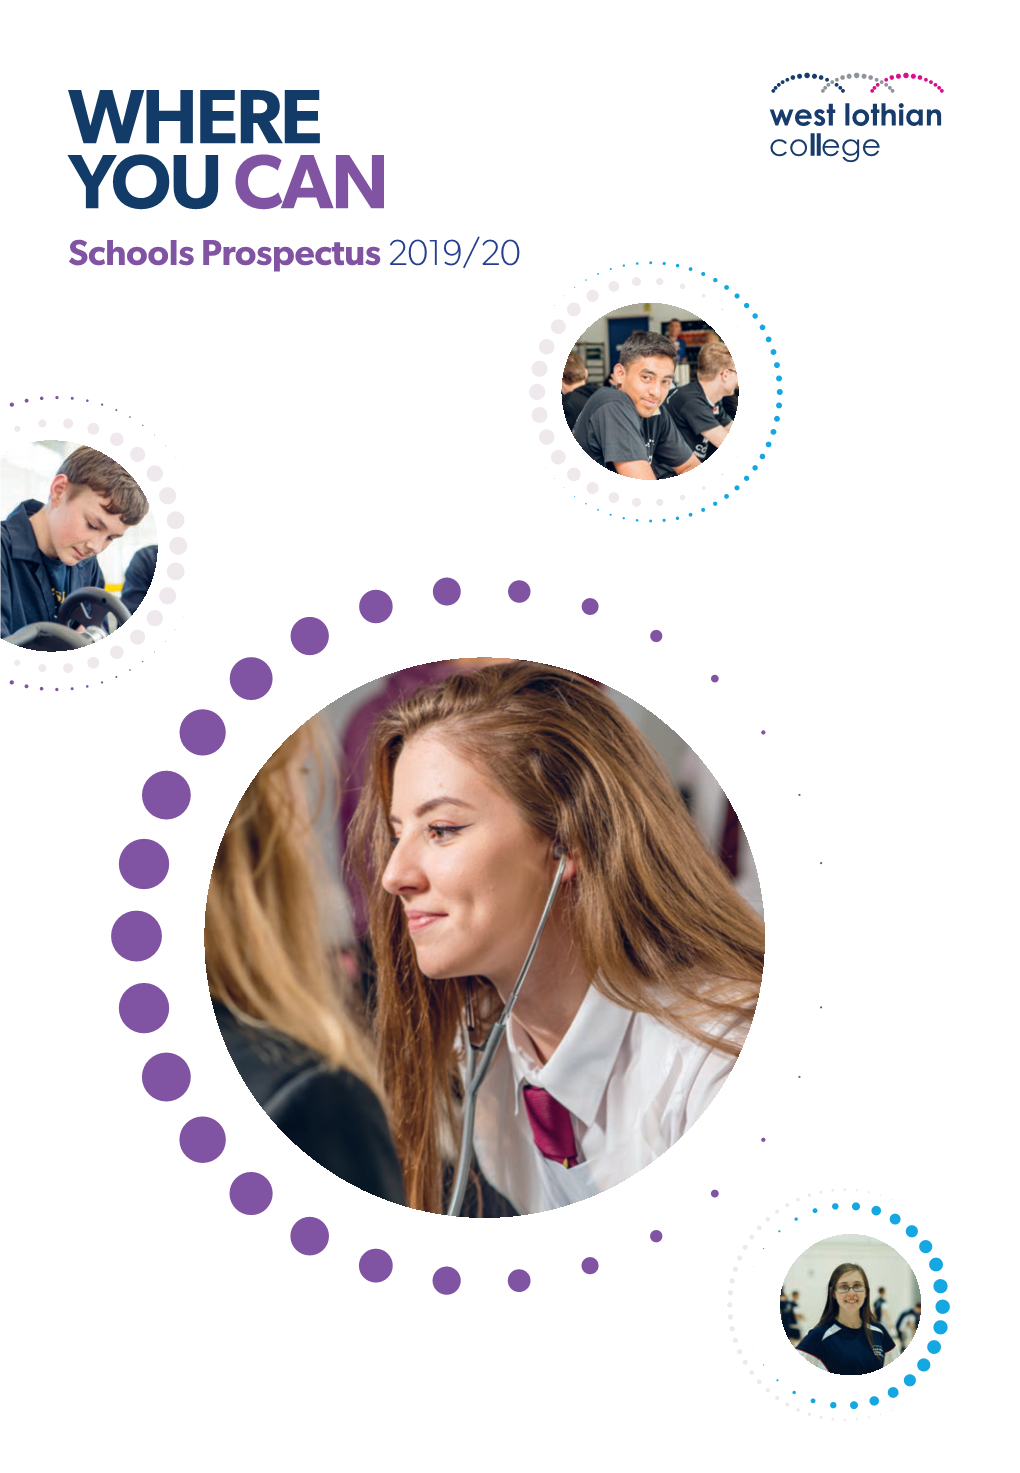 WHERE YOU CAN Schools Prospectus 2019/20 Contents